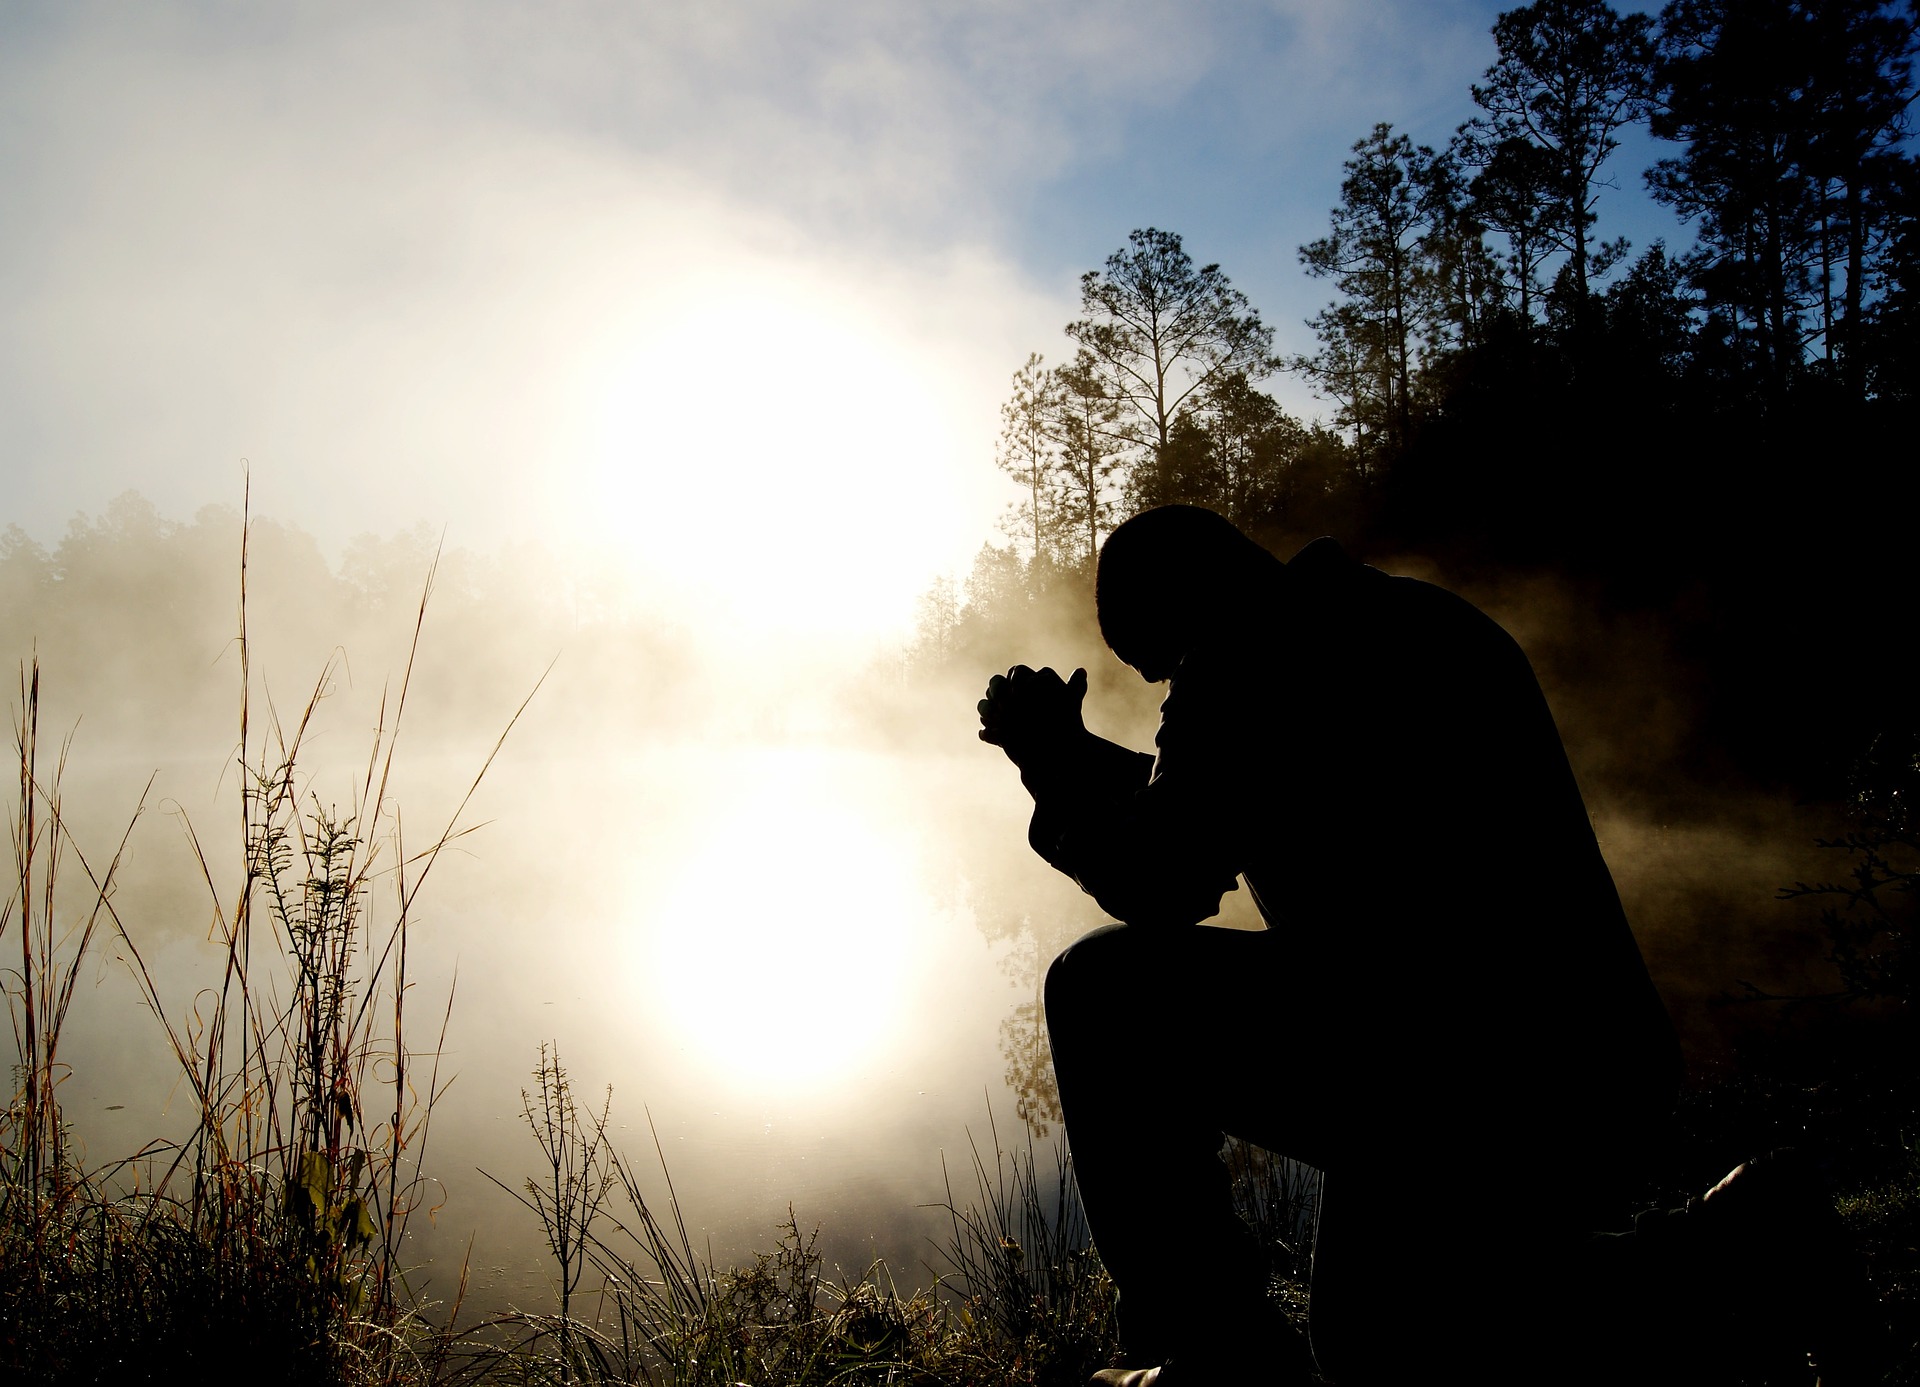 Prayers For Anxiety - How To Get God's Perspective On Panic, Fear, And Worry